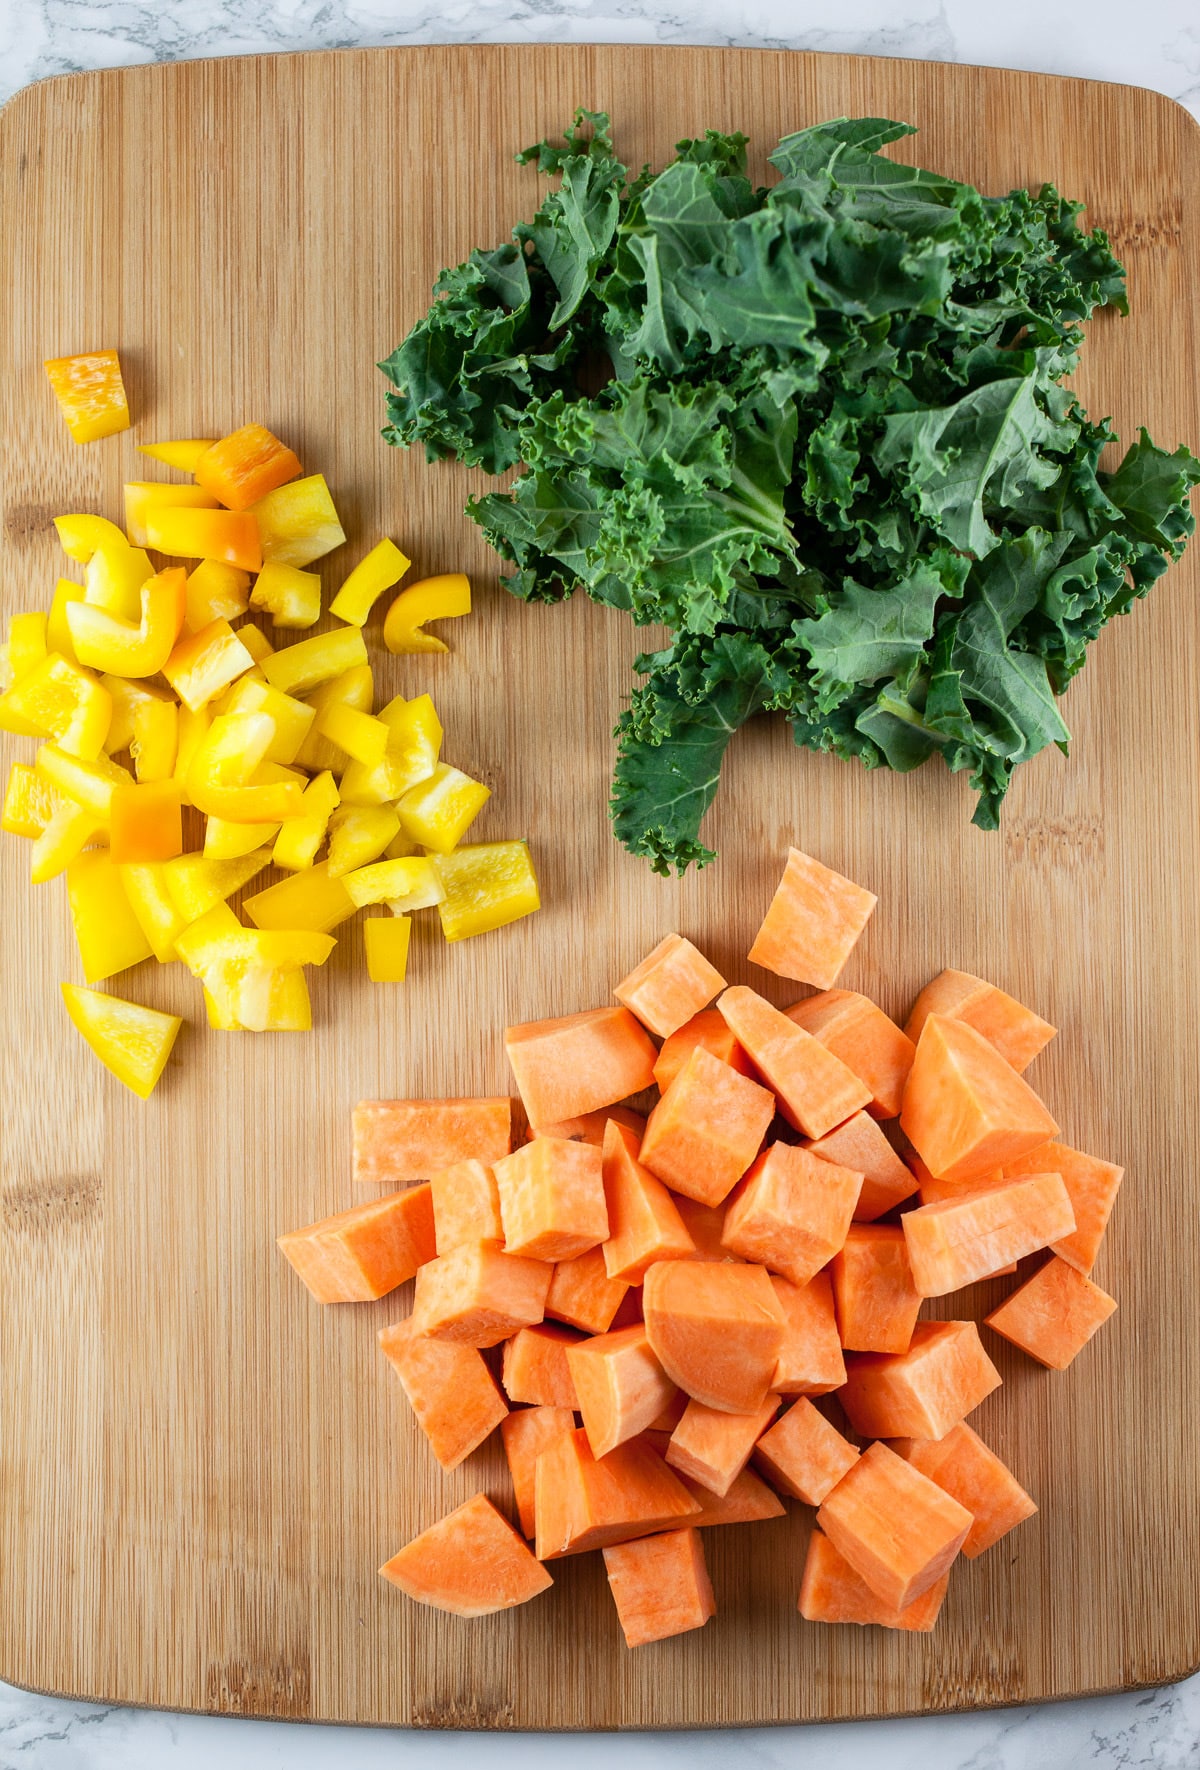 Diced sweet potatoes, yellow bell peppers, and chopped kale on wooden cutting board.